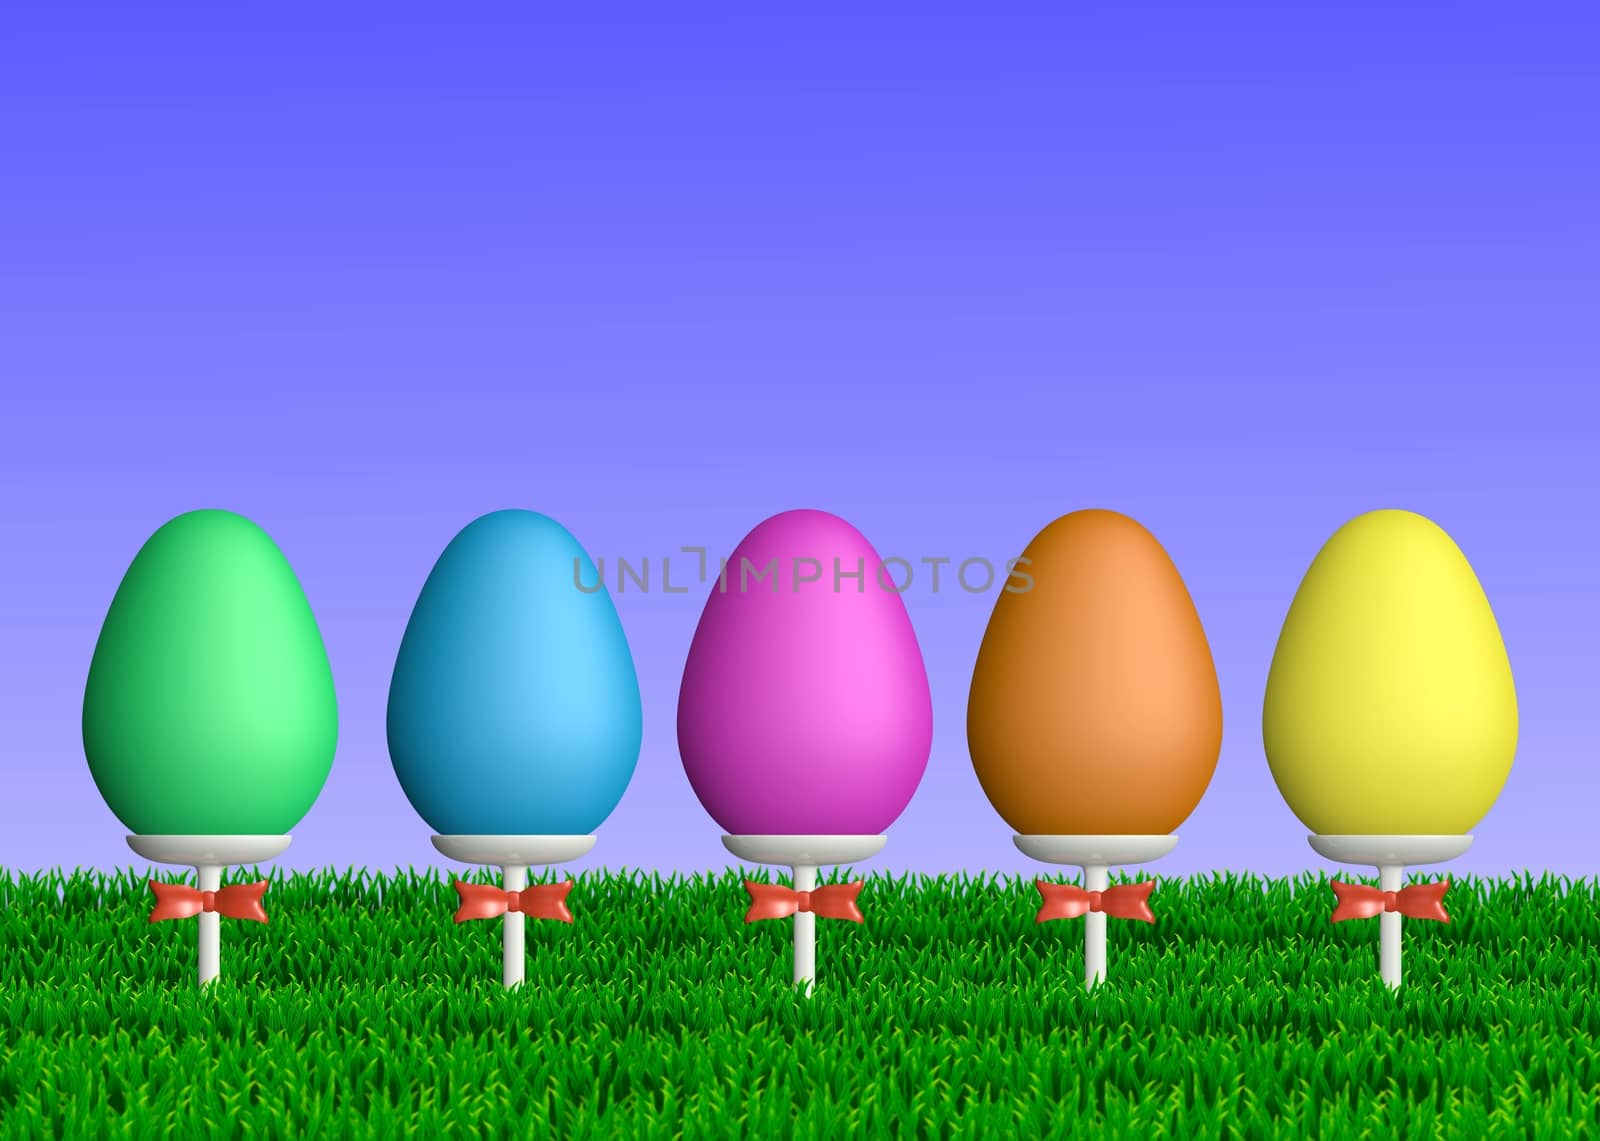 Row of colorful Easter eggs on ceramic sticks with ribbon bows placed in green grass. 
